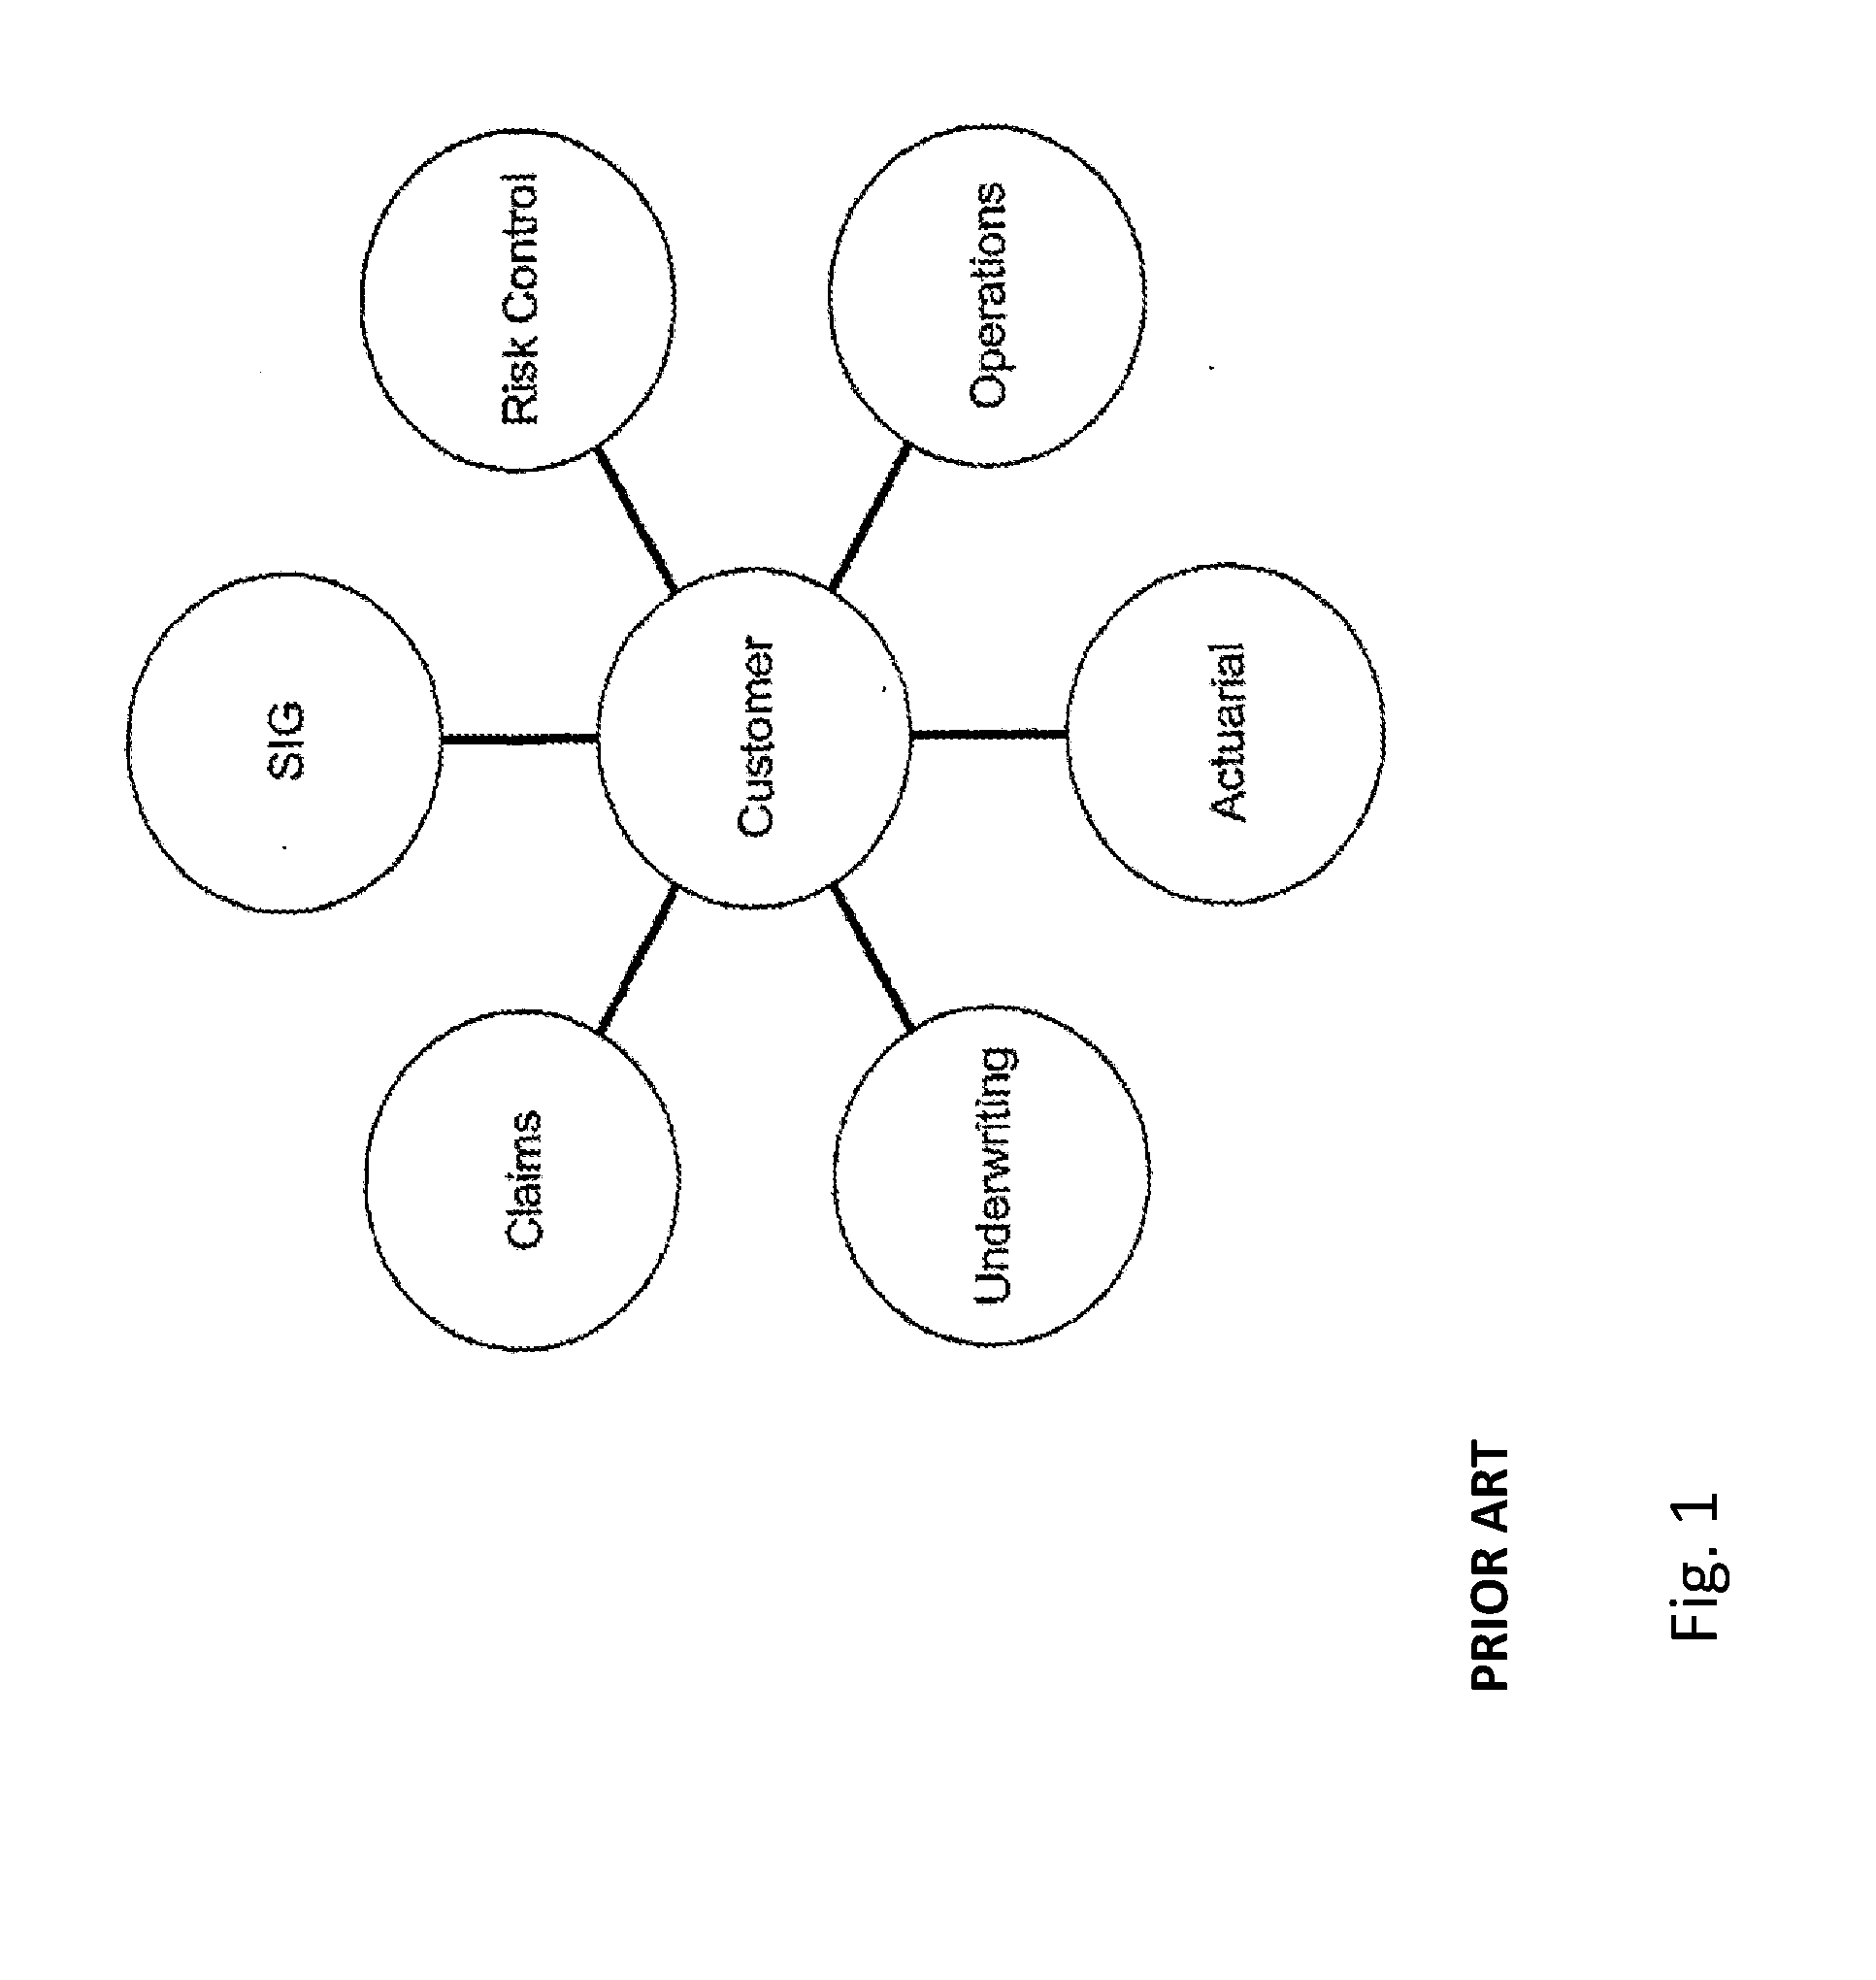 Systems and methods for comprehensive insurance loss management and loss minimization